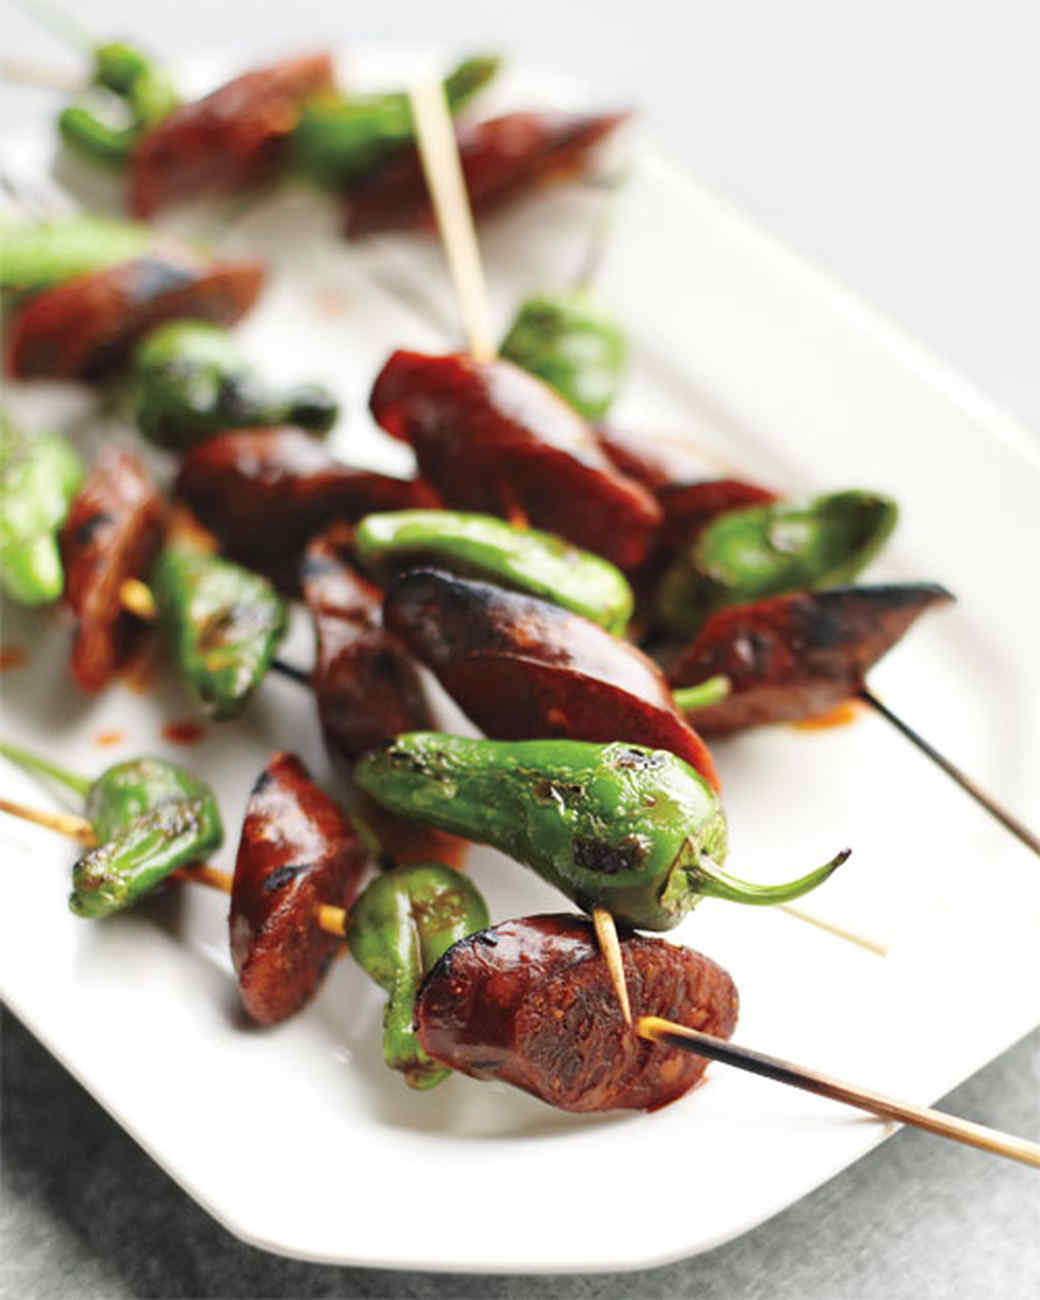 What is a recipe that uses Padron peppers?